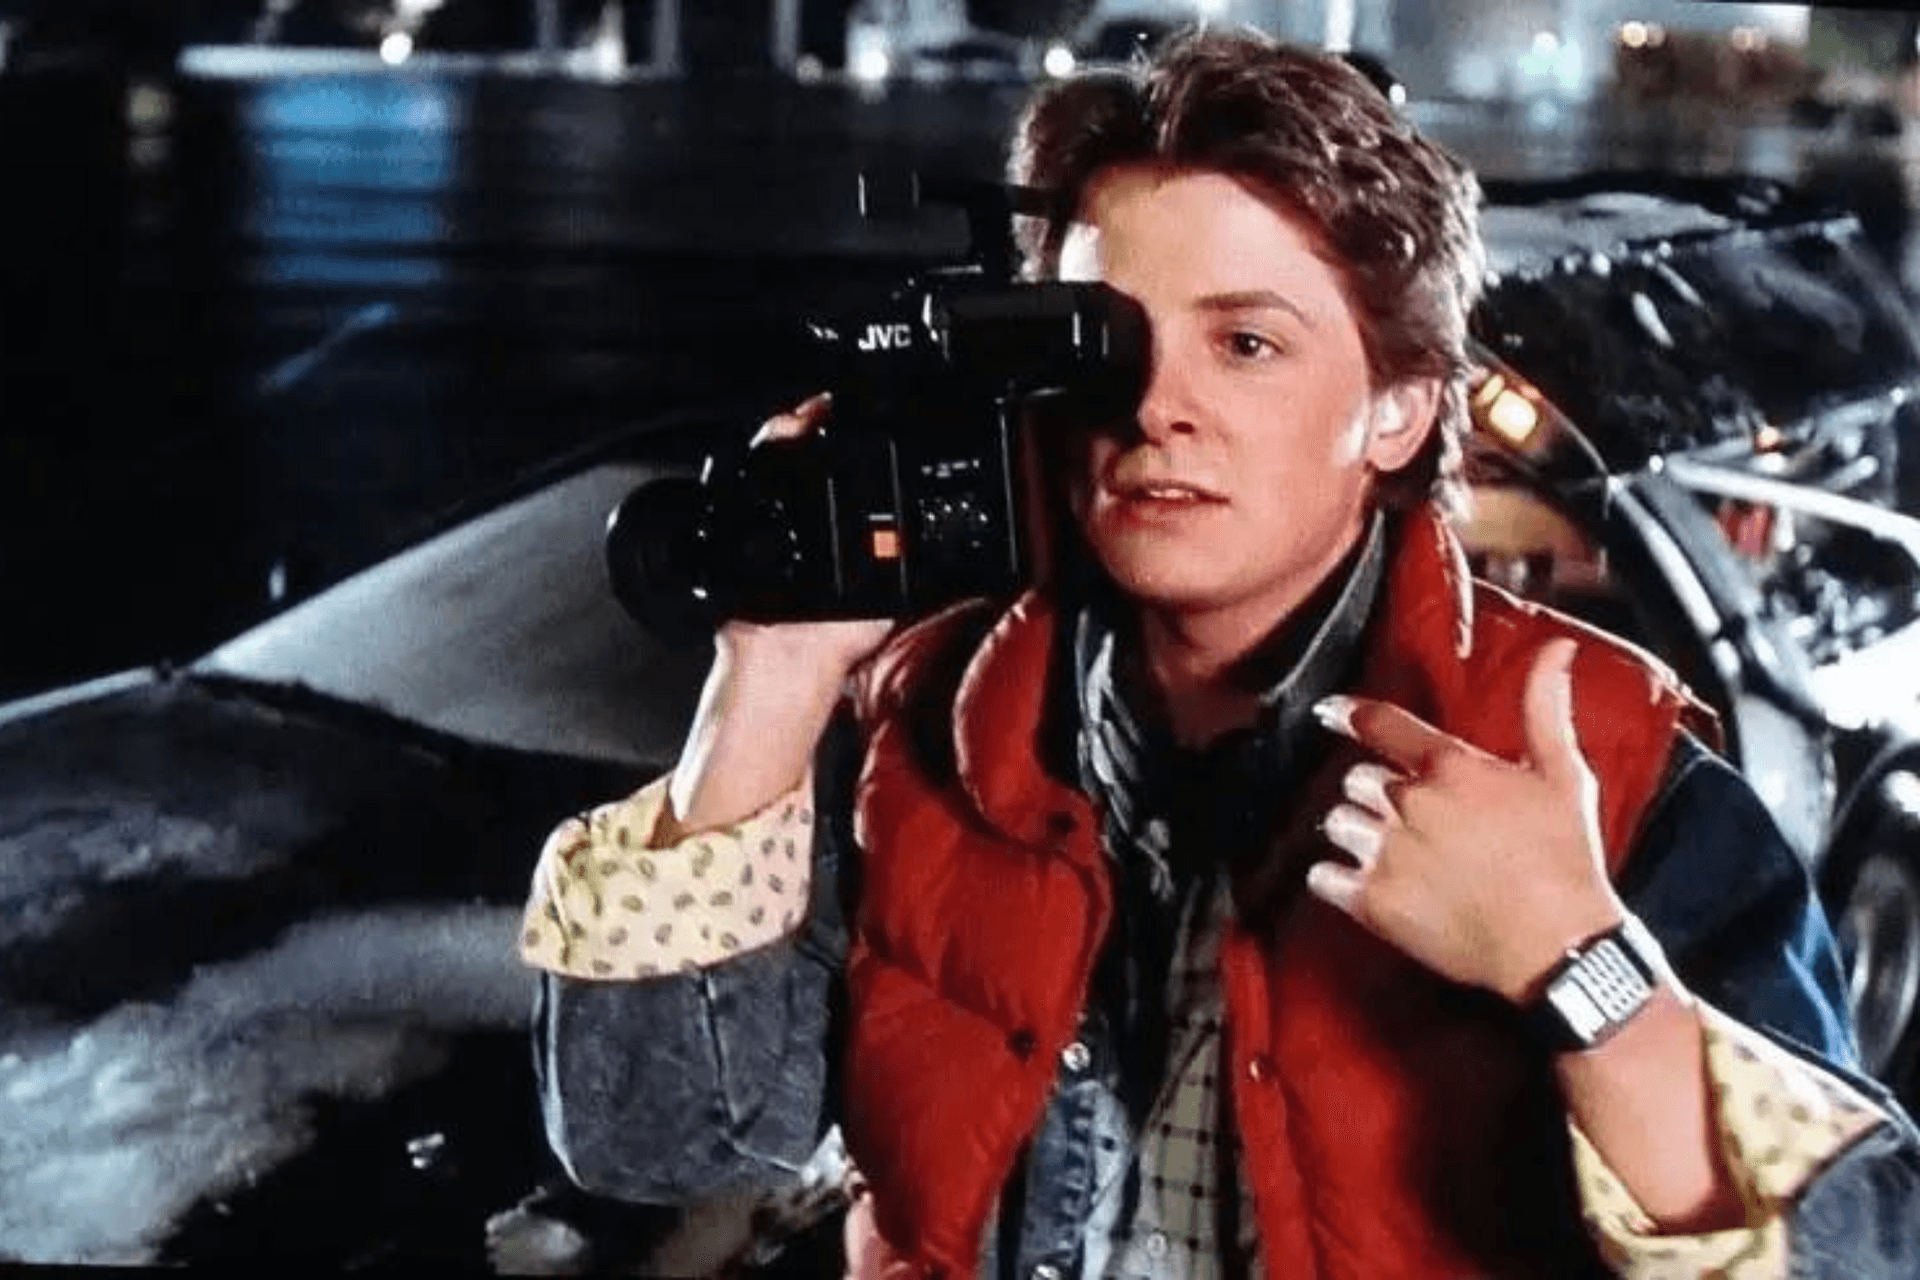 Marty McFly wearing a calculator watch in 1989's Back to the Future II Photo: GQ / Digital-Watch.com